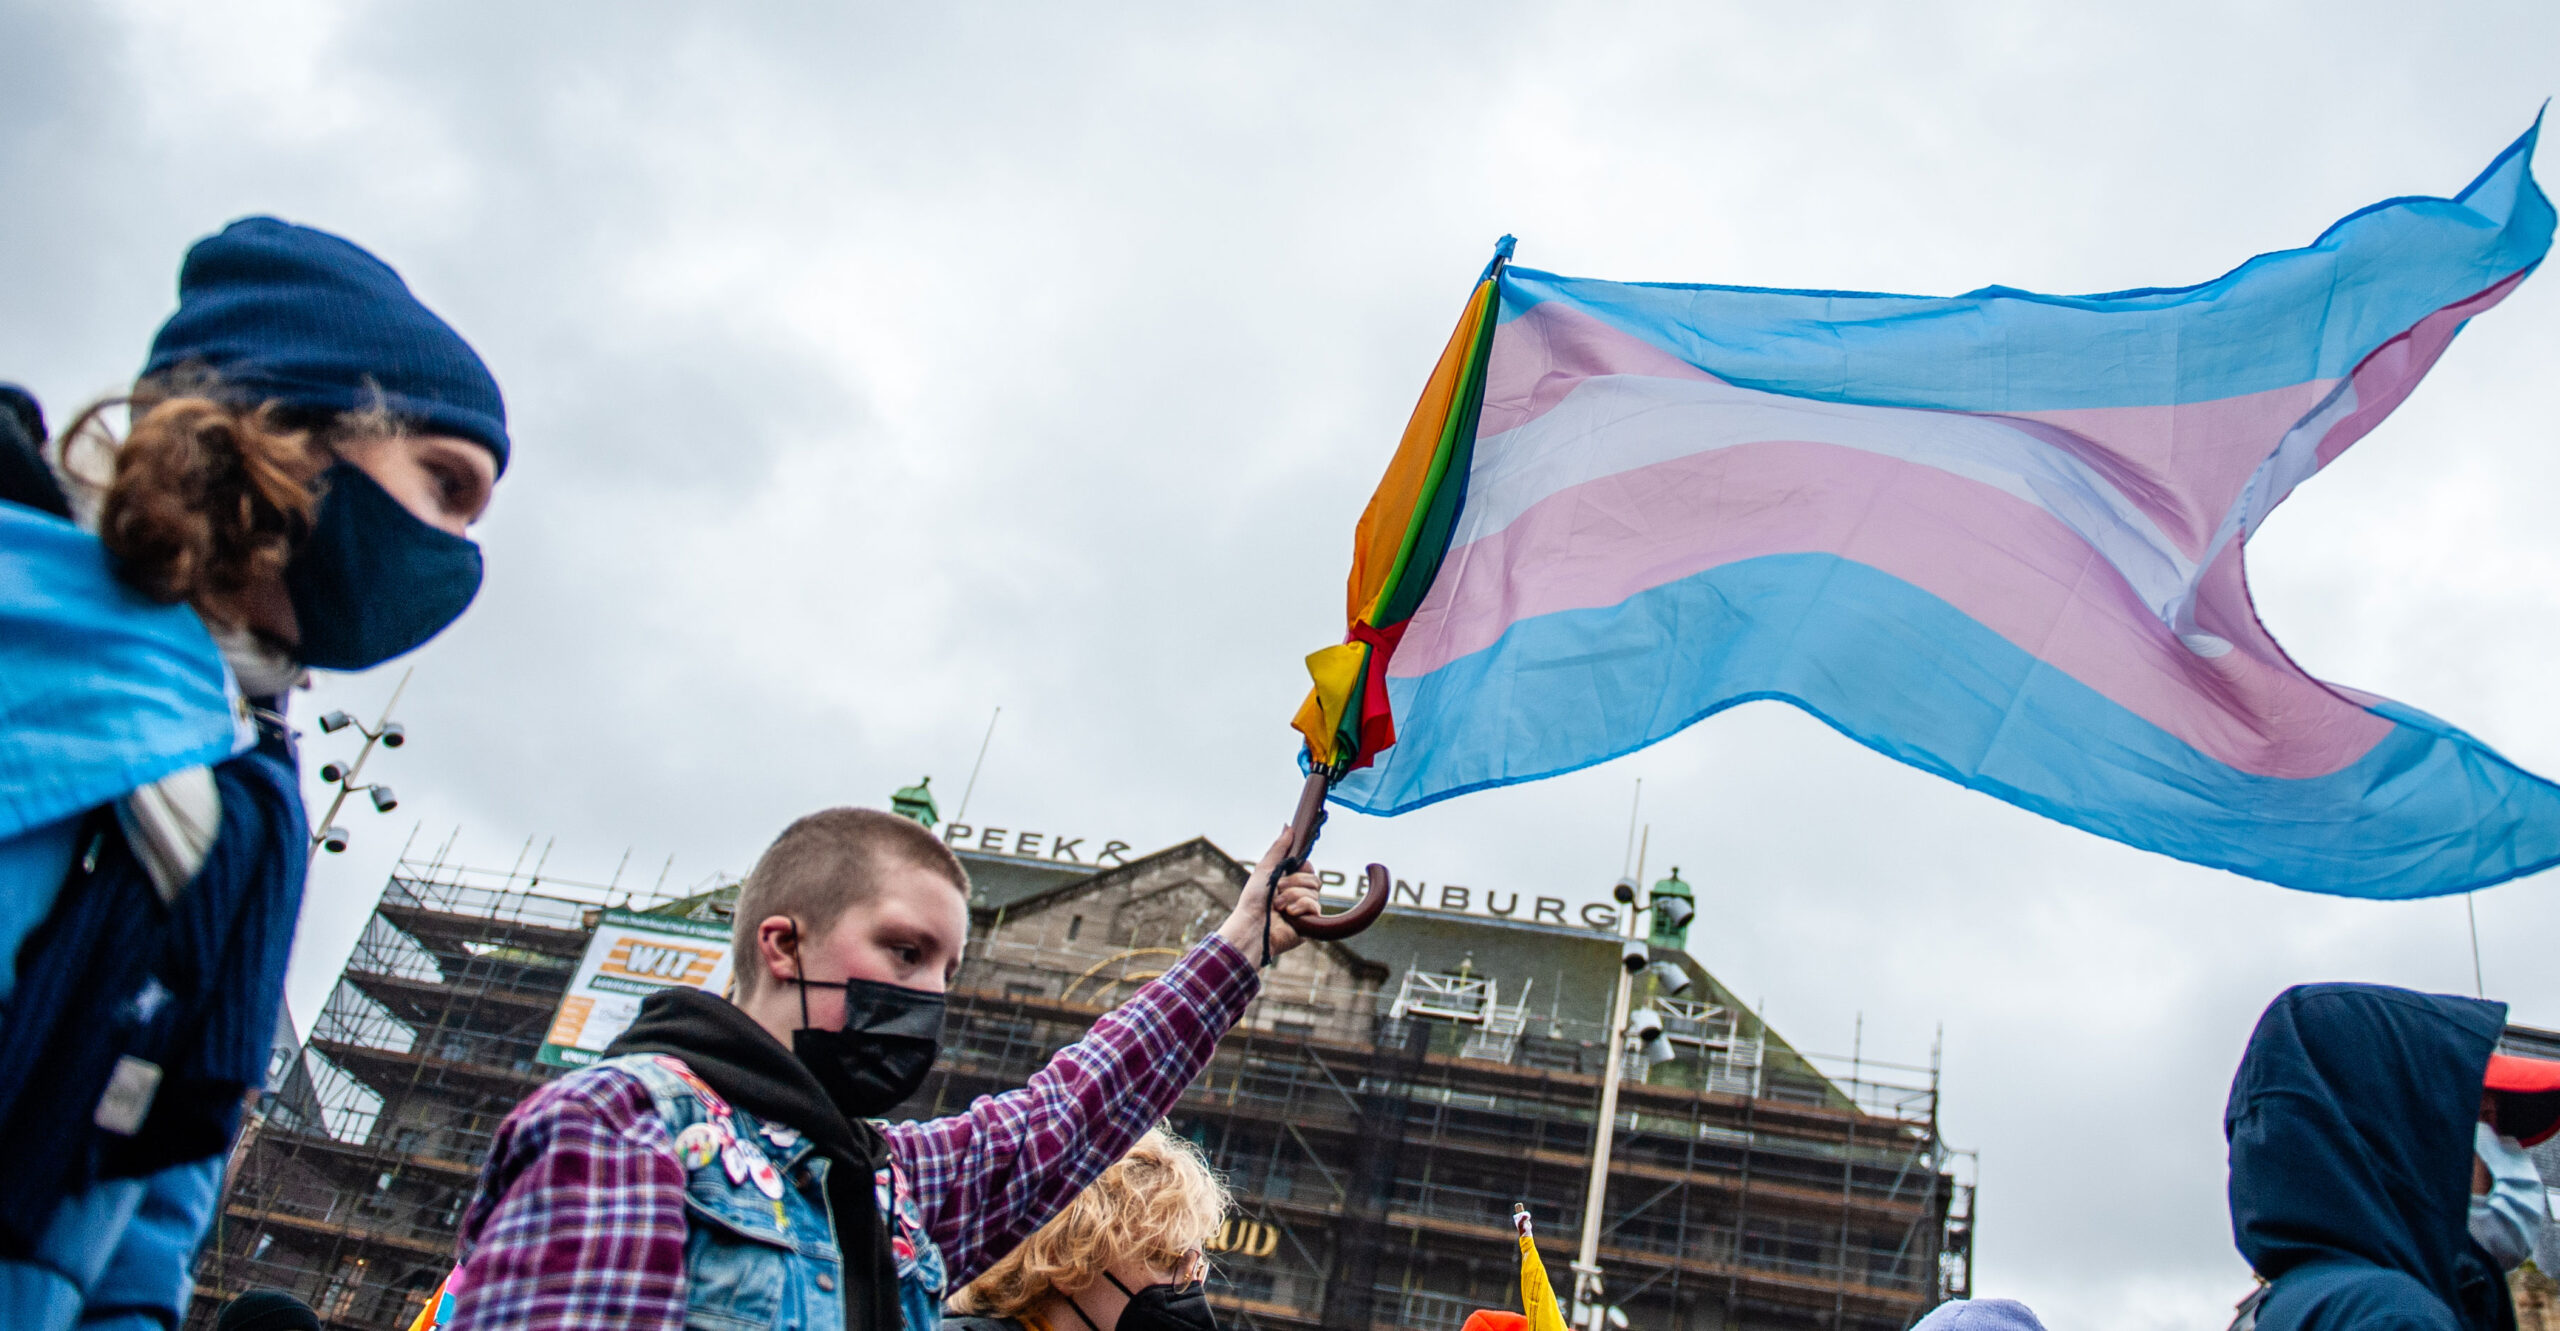 How 1 Small European Study Changed Transgender Medicine in US